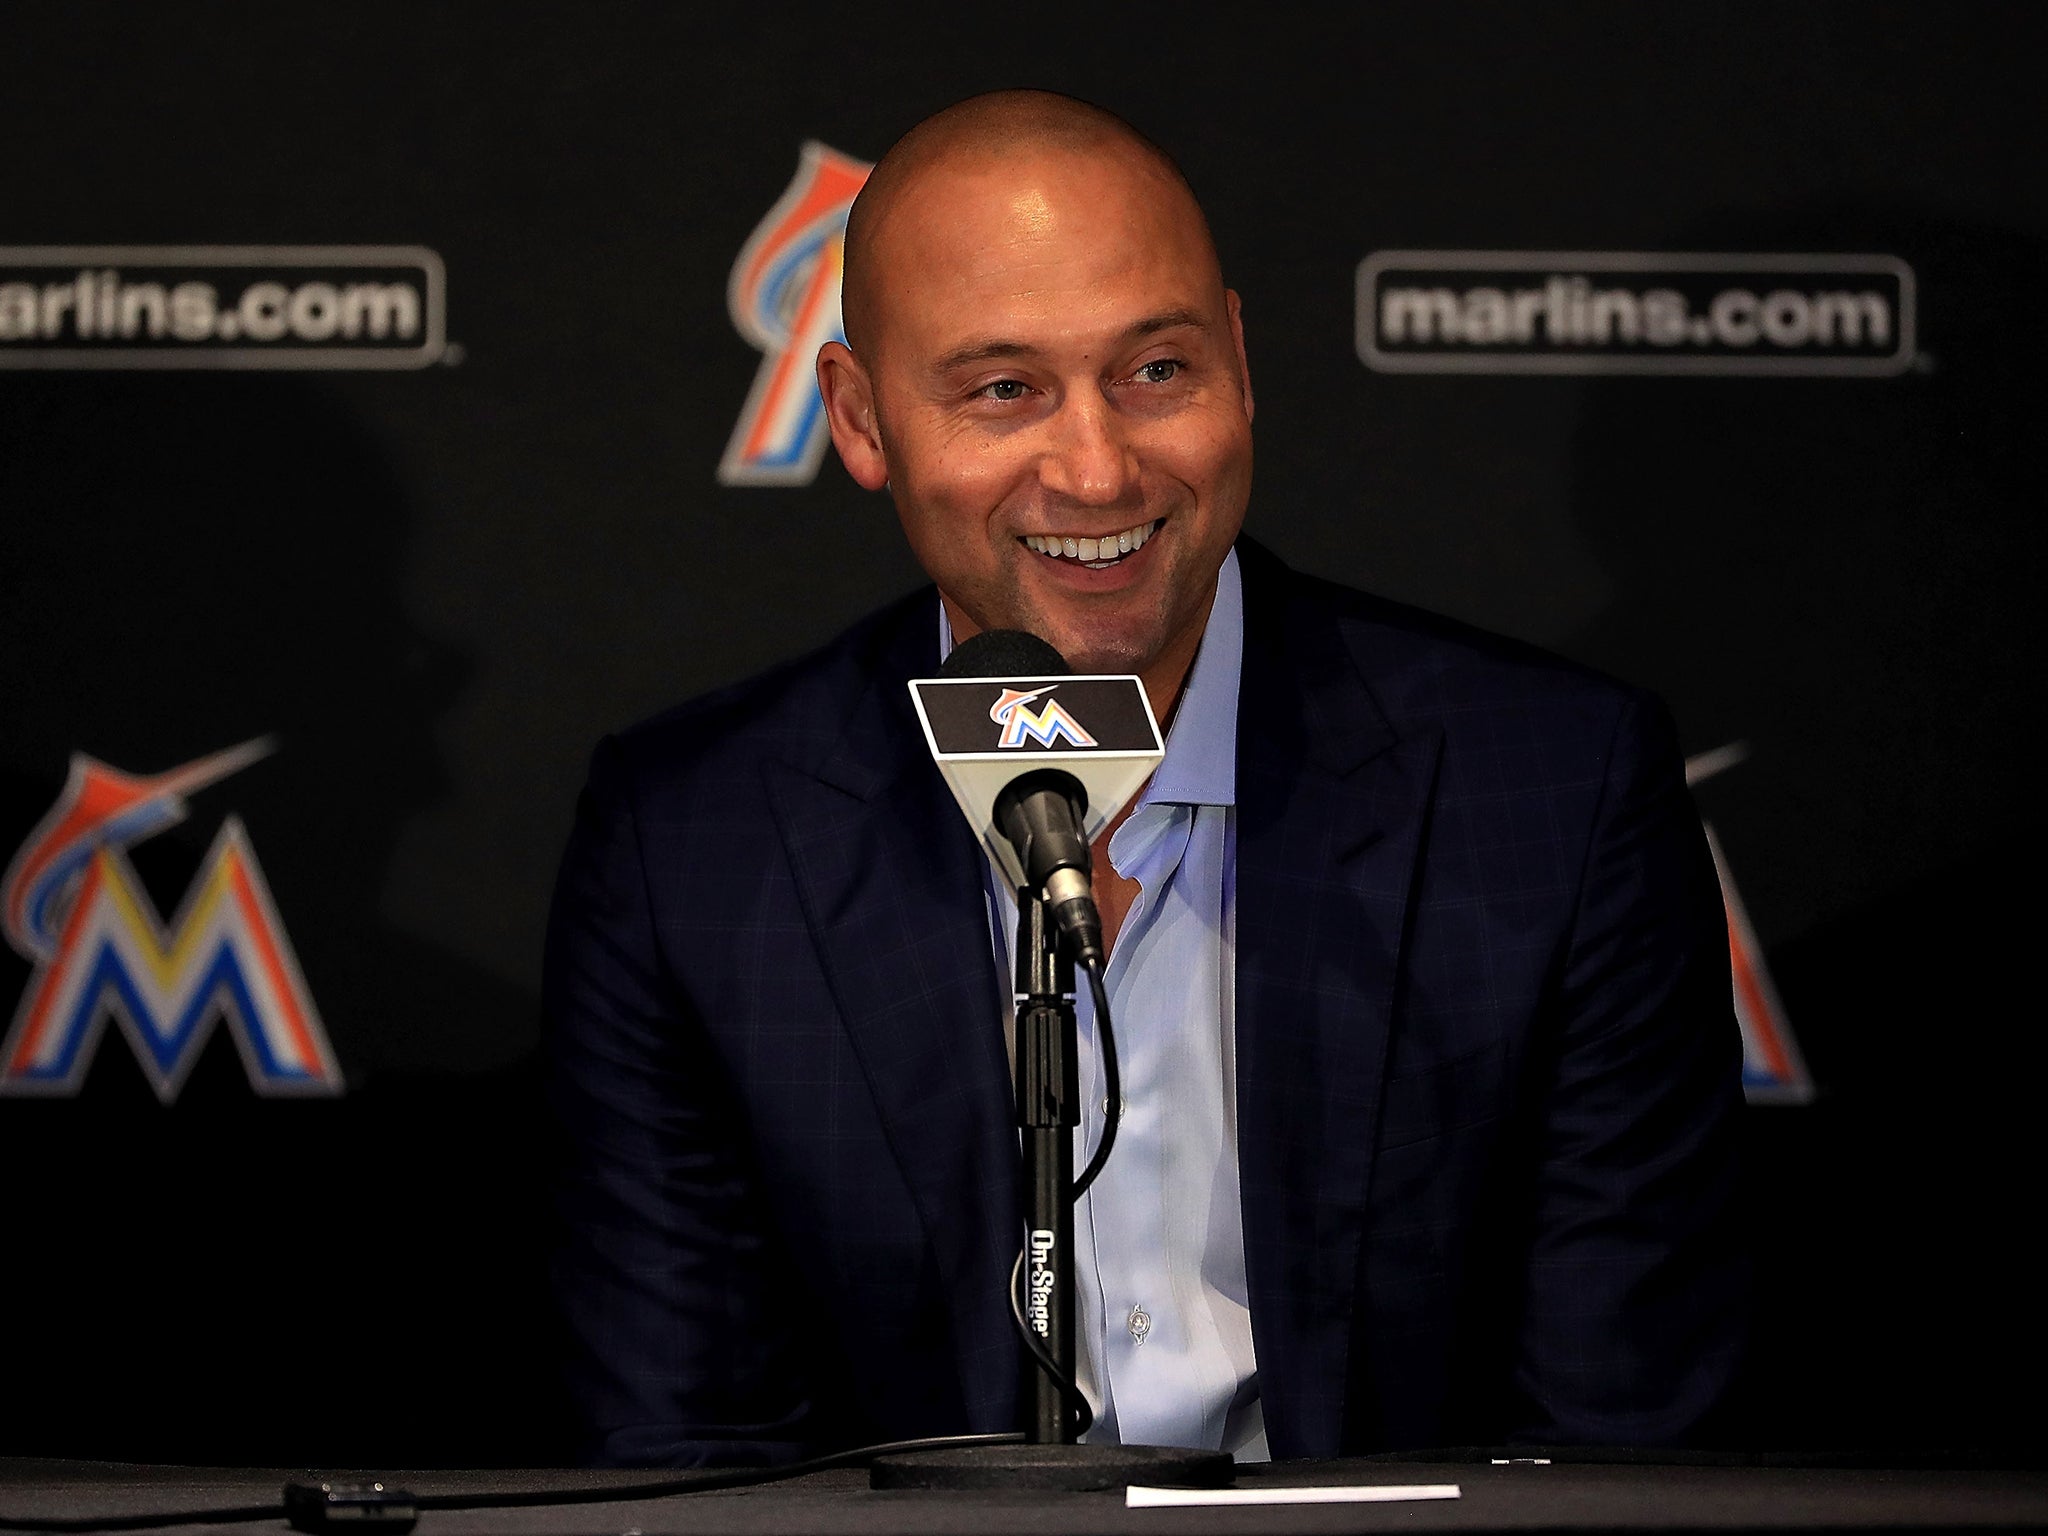 Derek Jeter and David Beckham could well combine their two teams at the new stadium